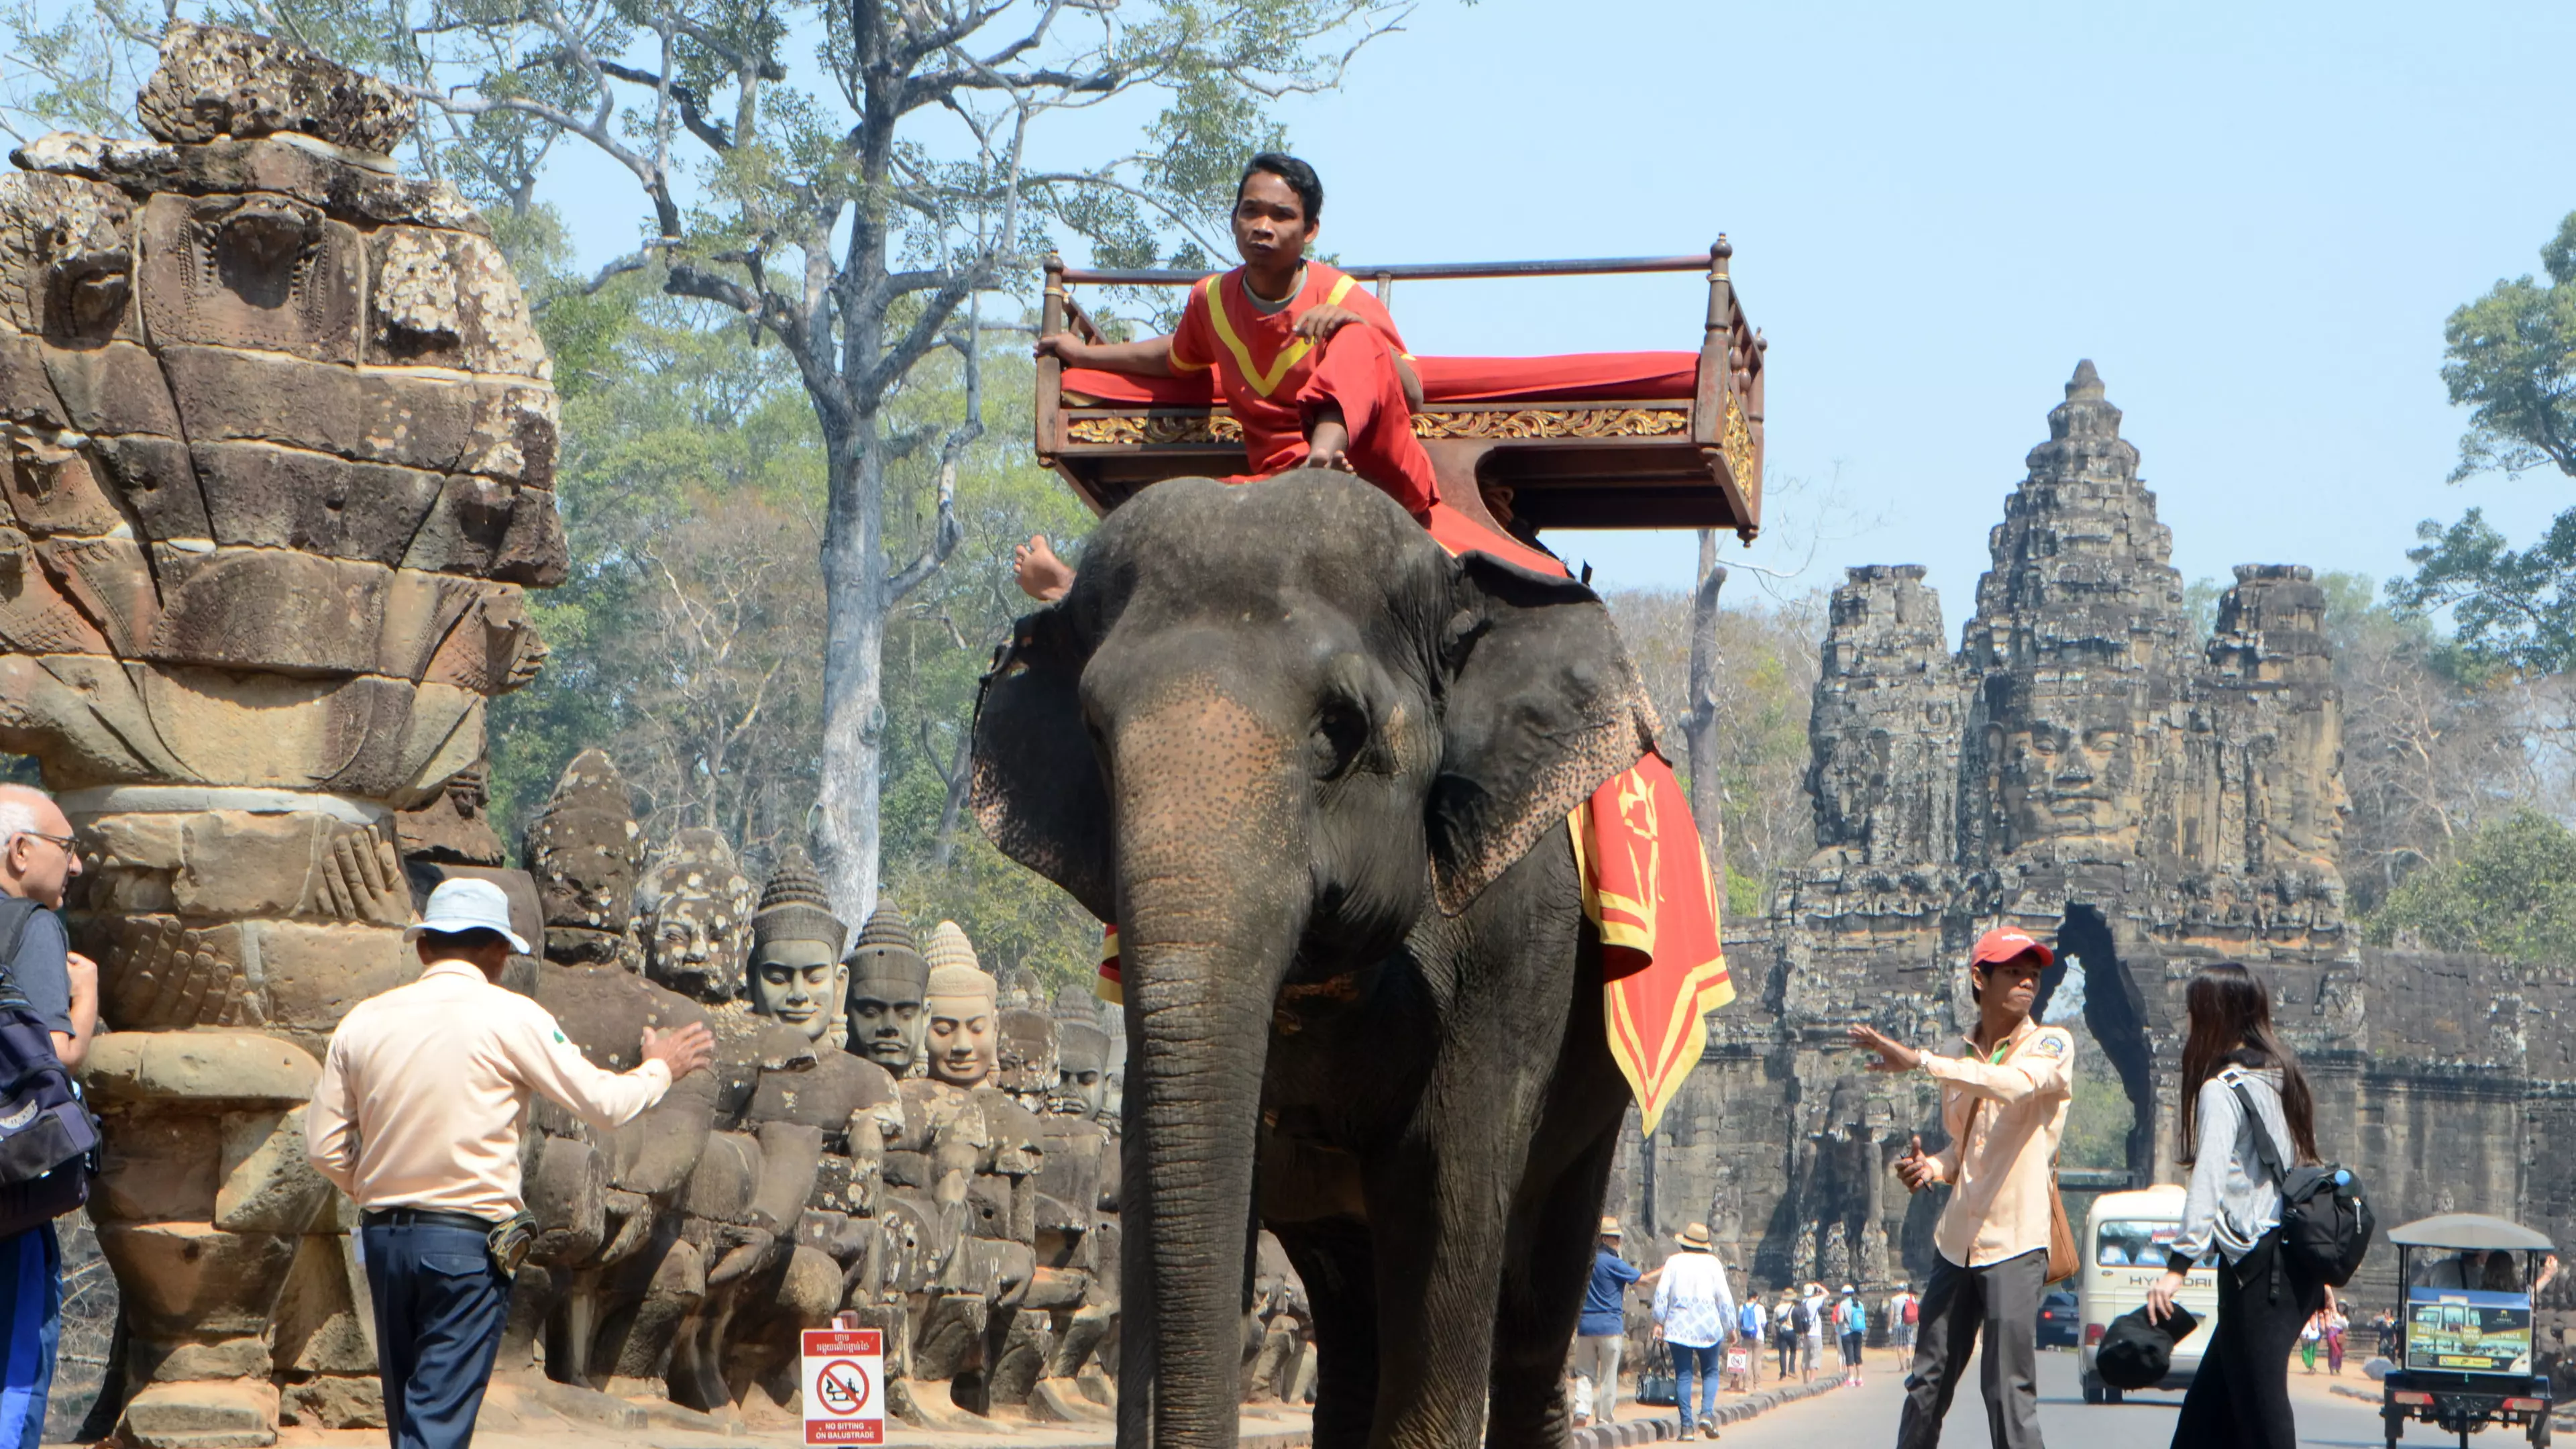 Elephant Rides At Cambodia's Angkor Wat Temple To Be Banned